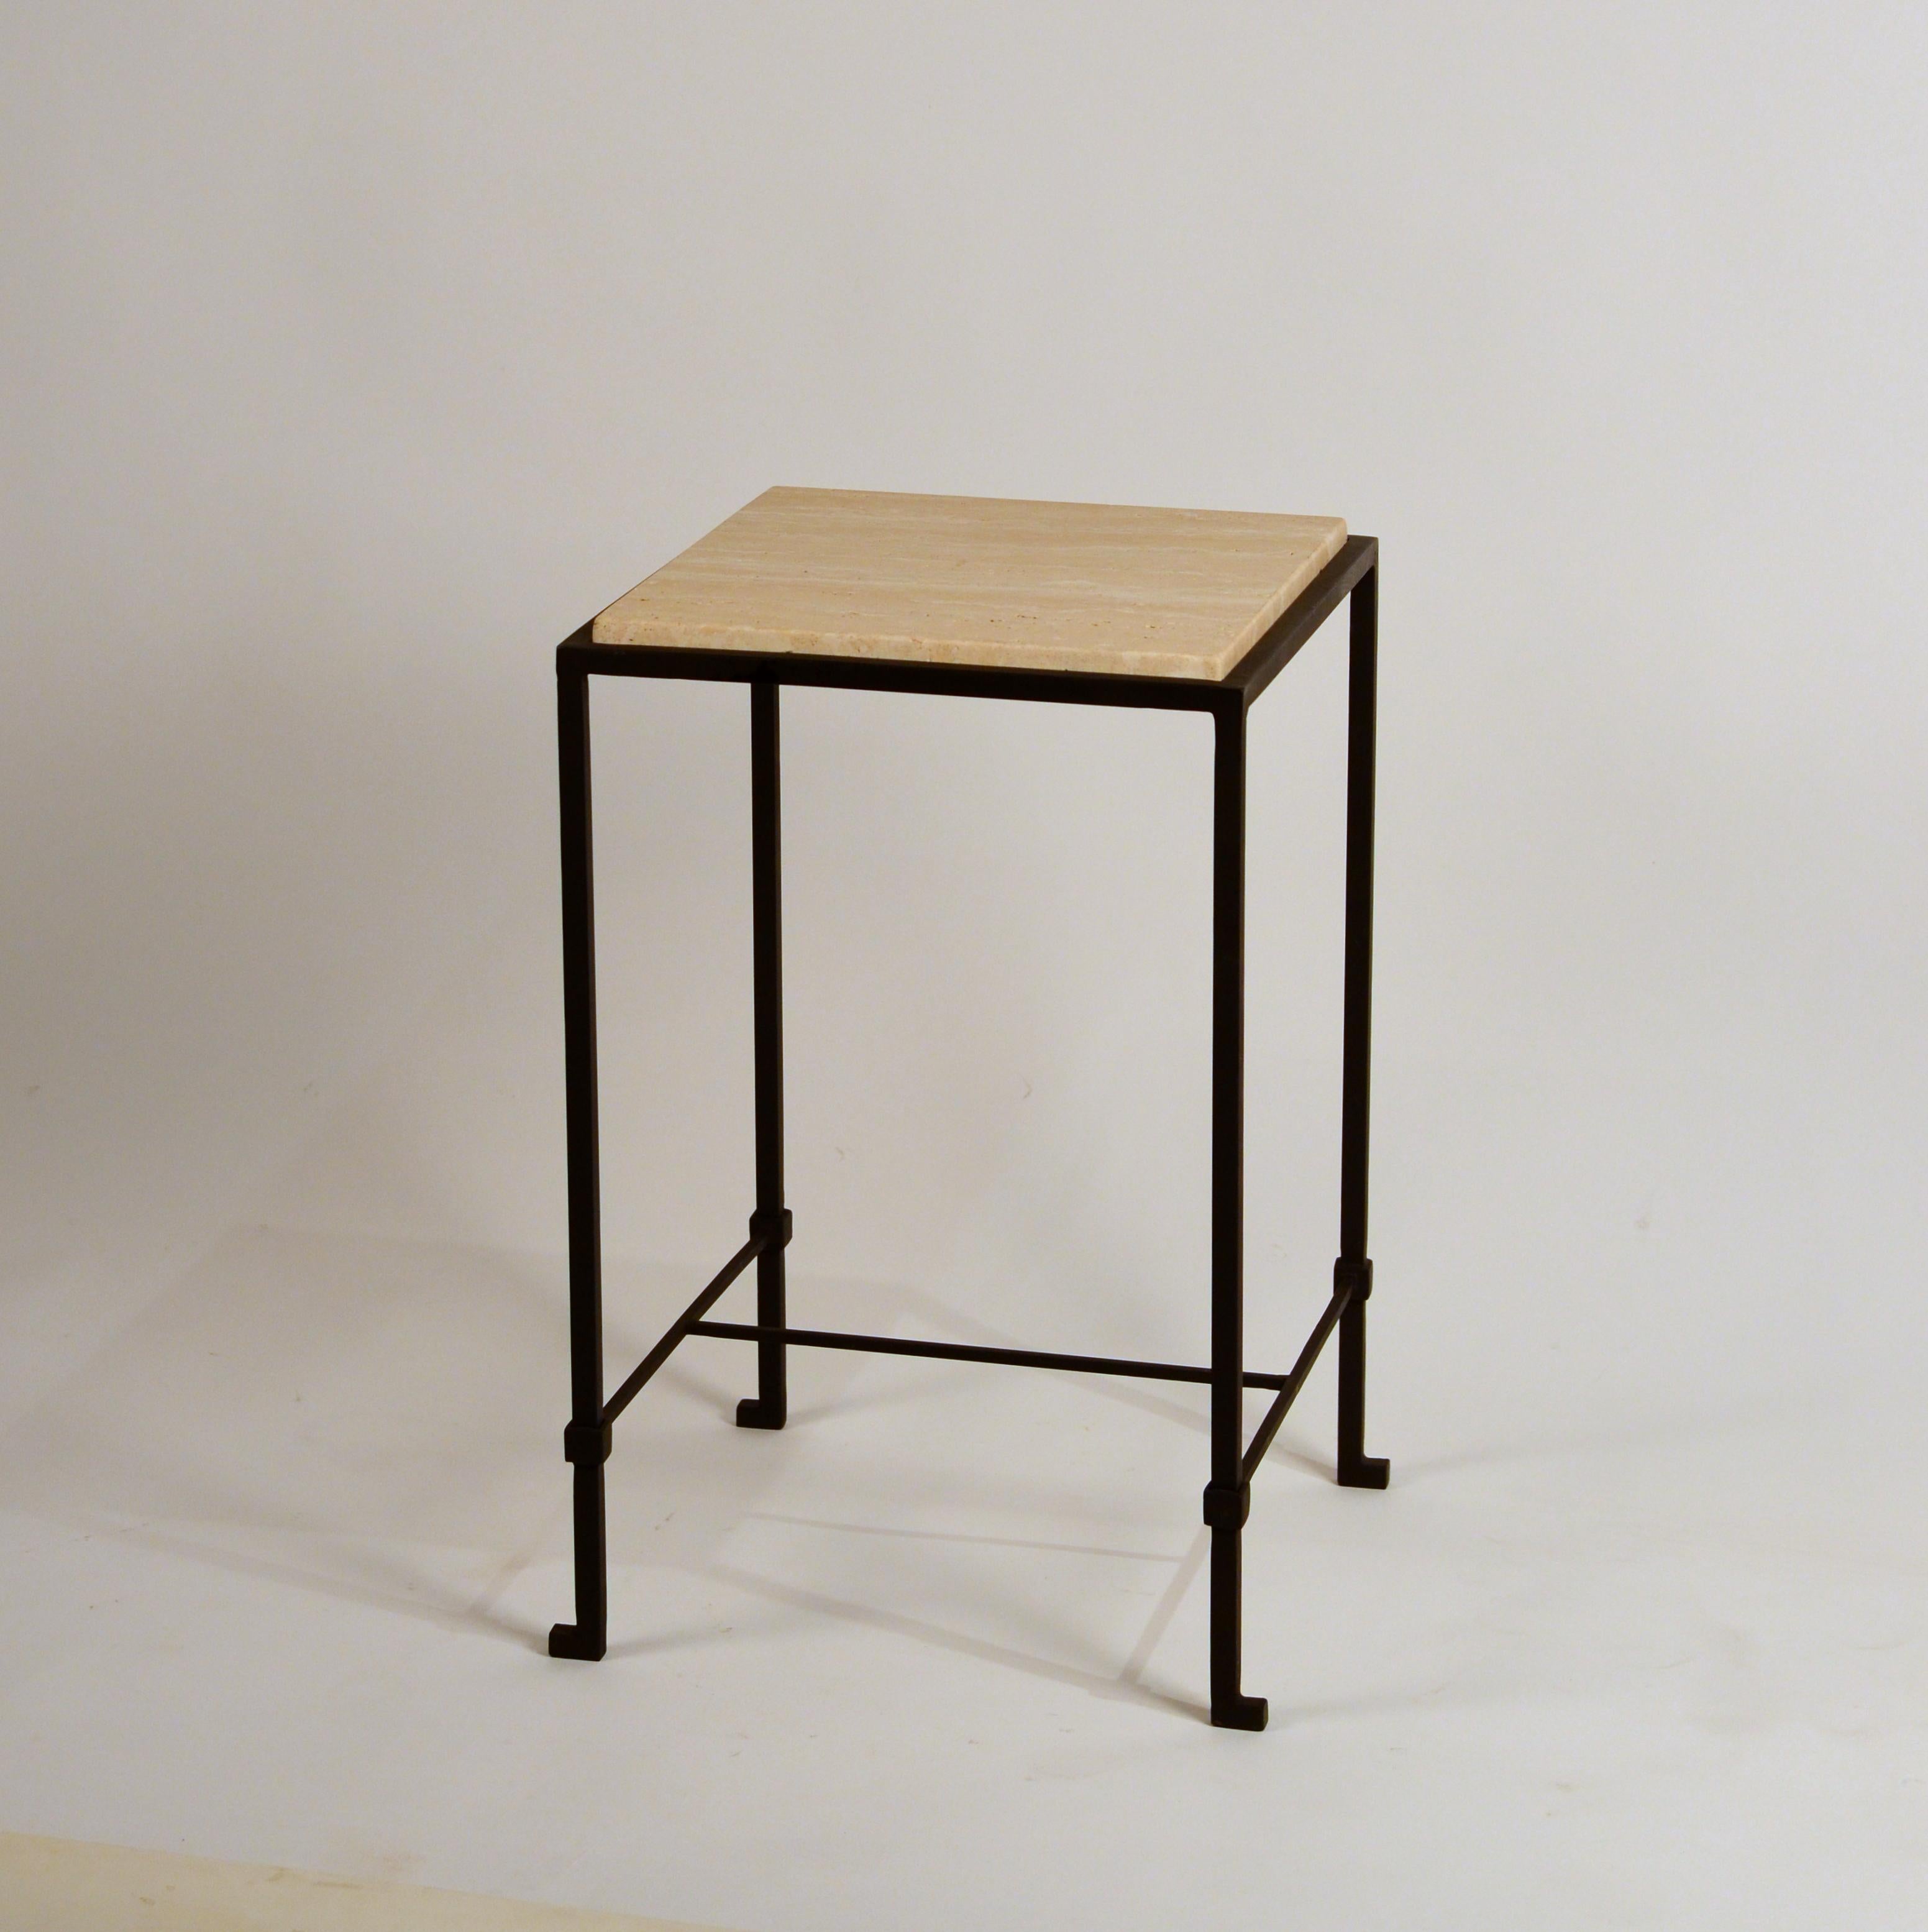 'Diagramme' wrought iron and honed travertine drinks table by Design Frères. Classic, understated design.